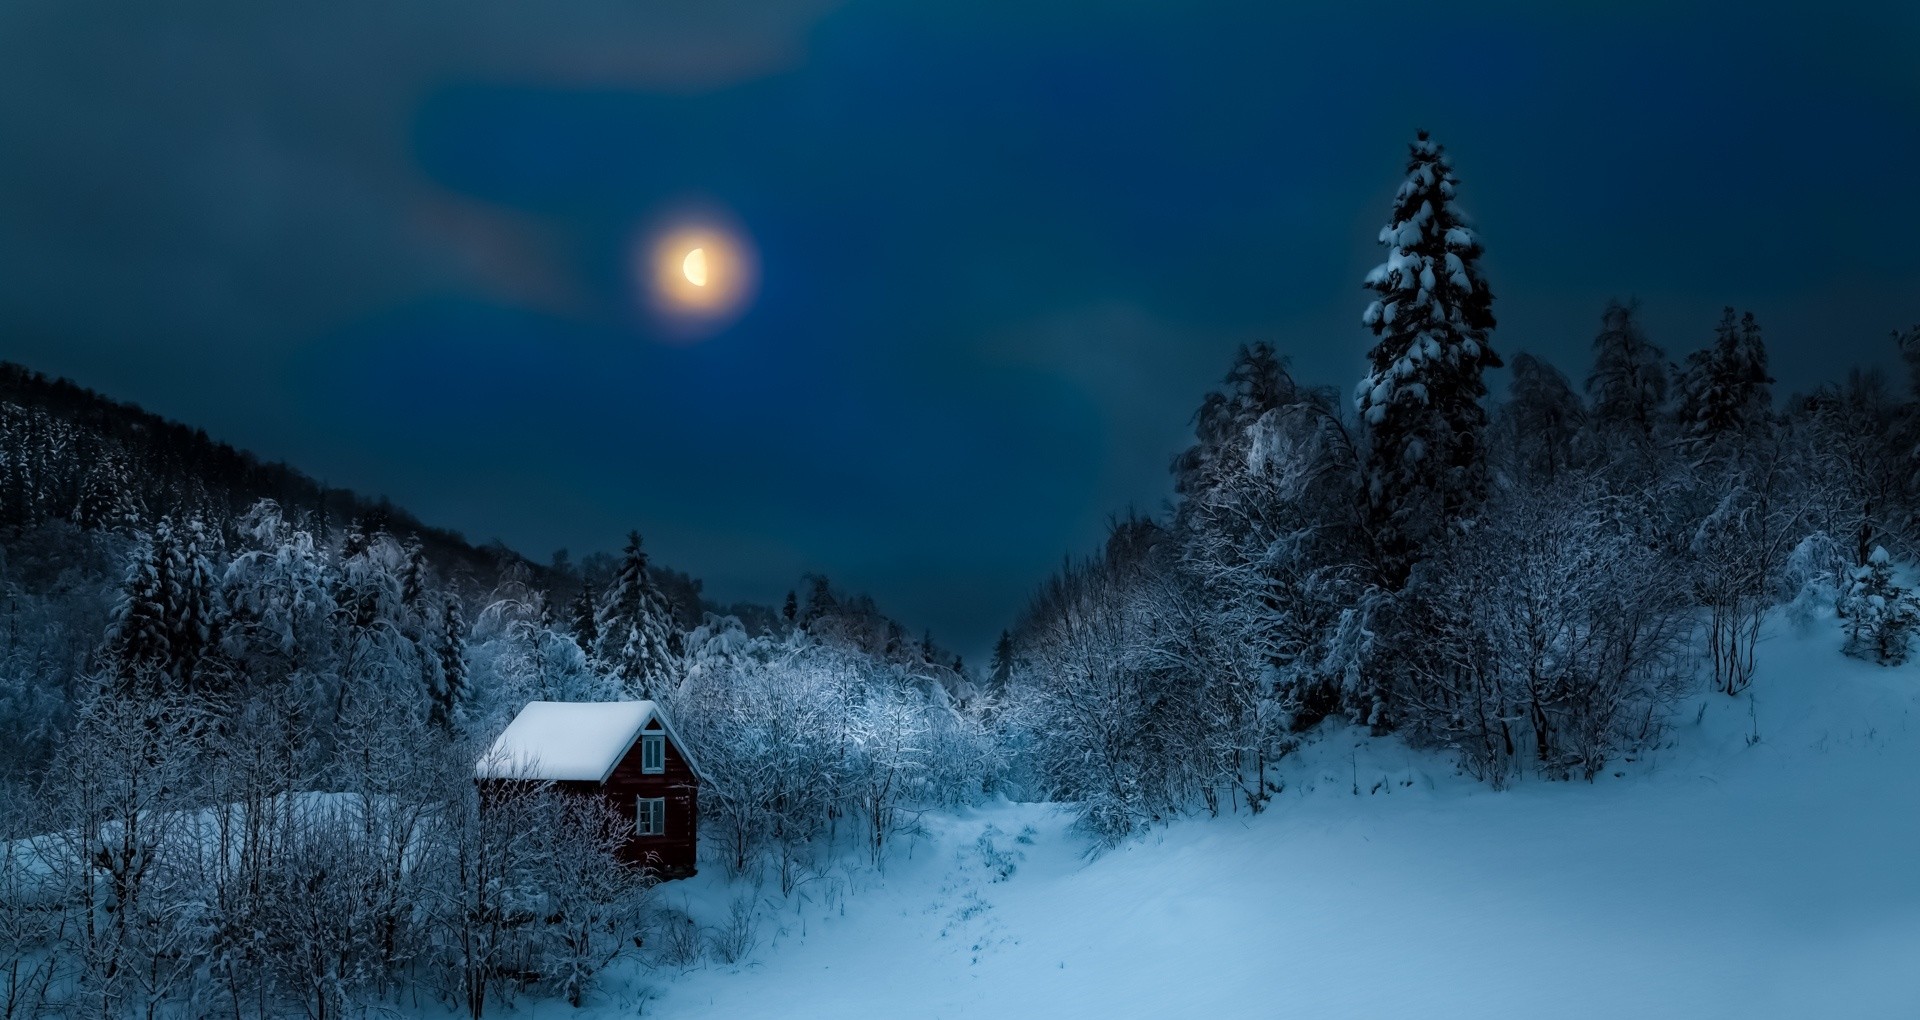 General 1920x1020 cottage forest hills mist nature Moon winter landscape snow night cold outdoors cabin